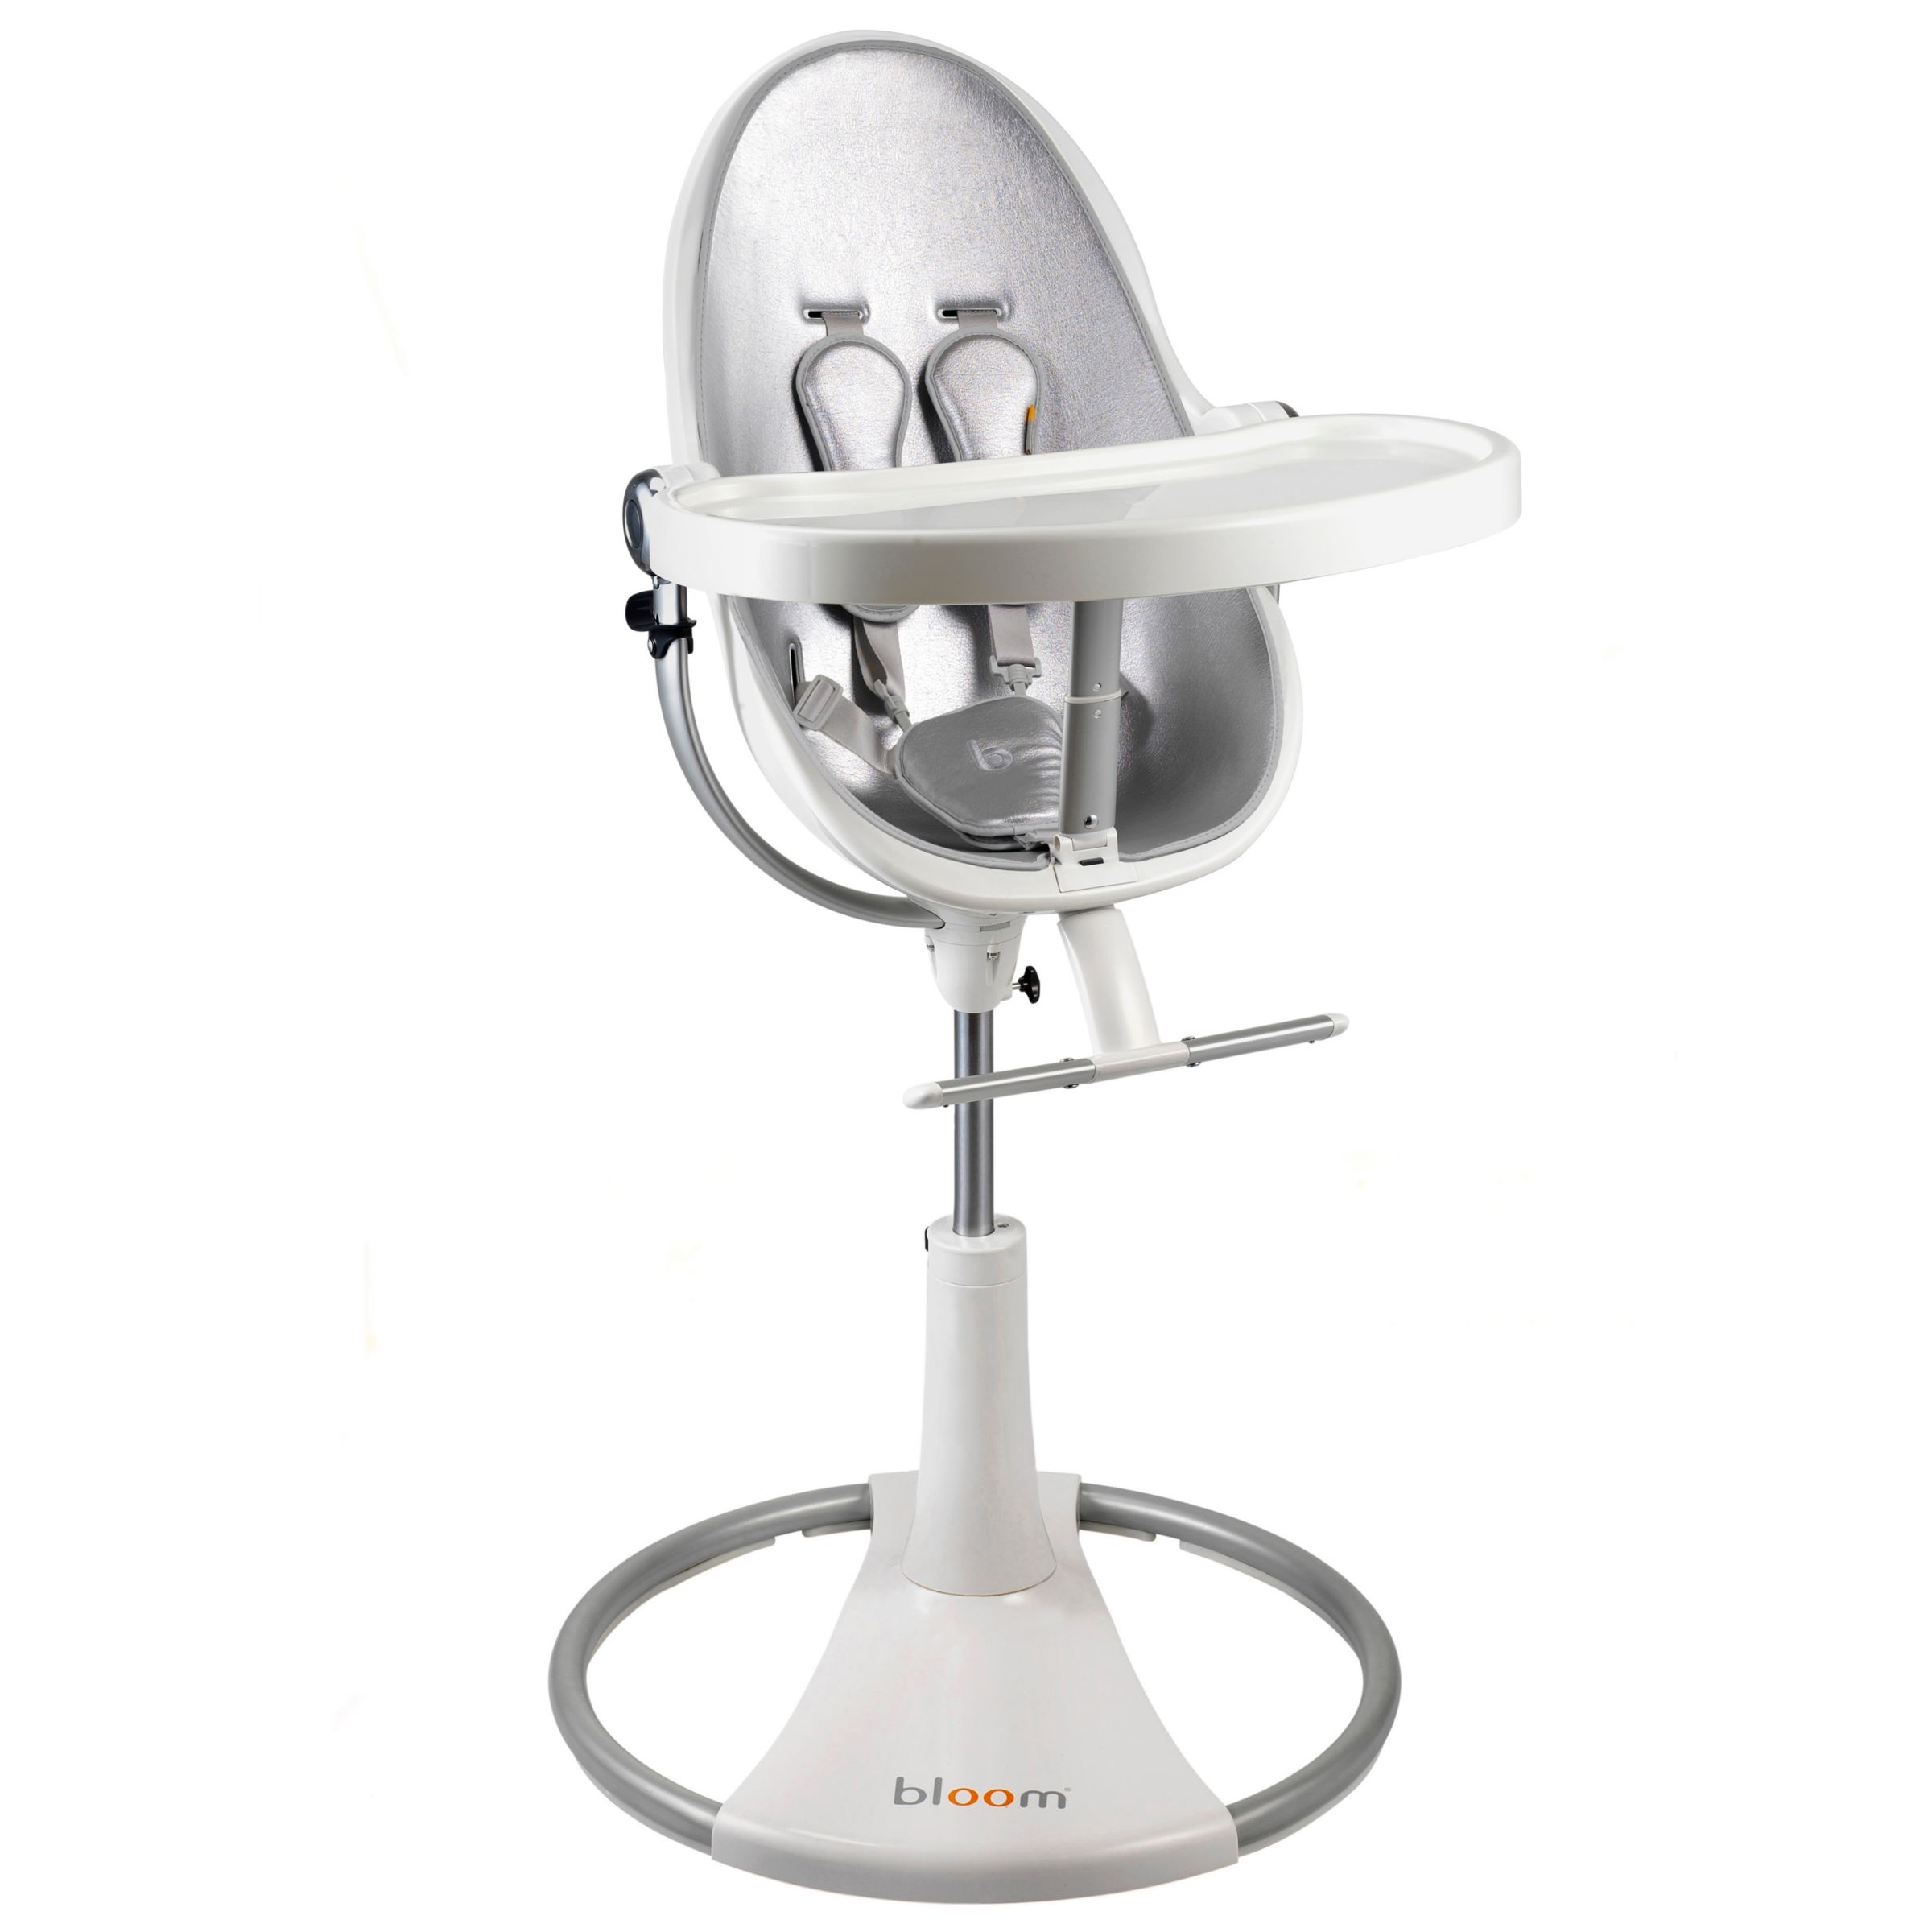 bloom Fresco Loft Contemporary Leatherette Baby Chair, Ivory White with Lunar Silver at John Lewis